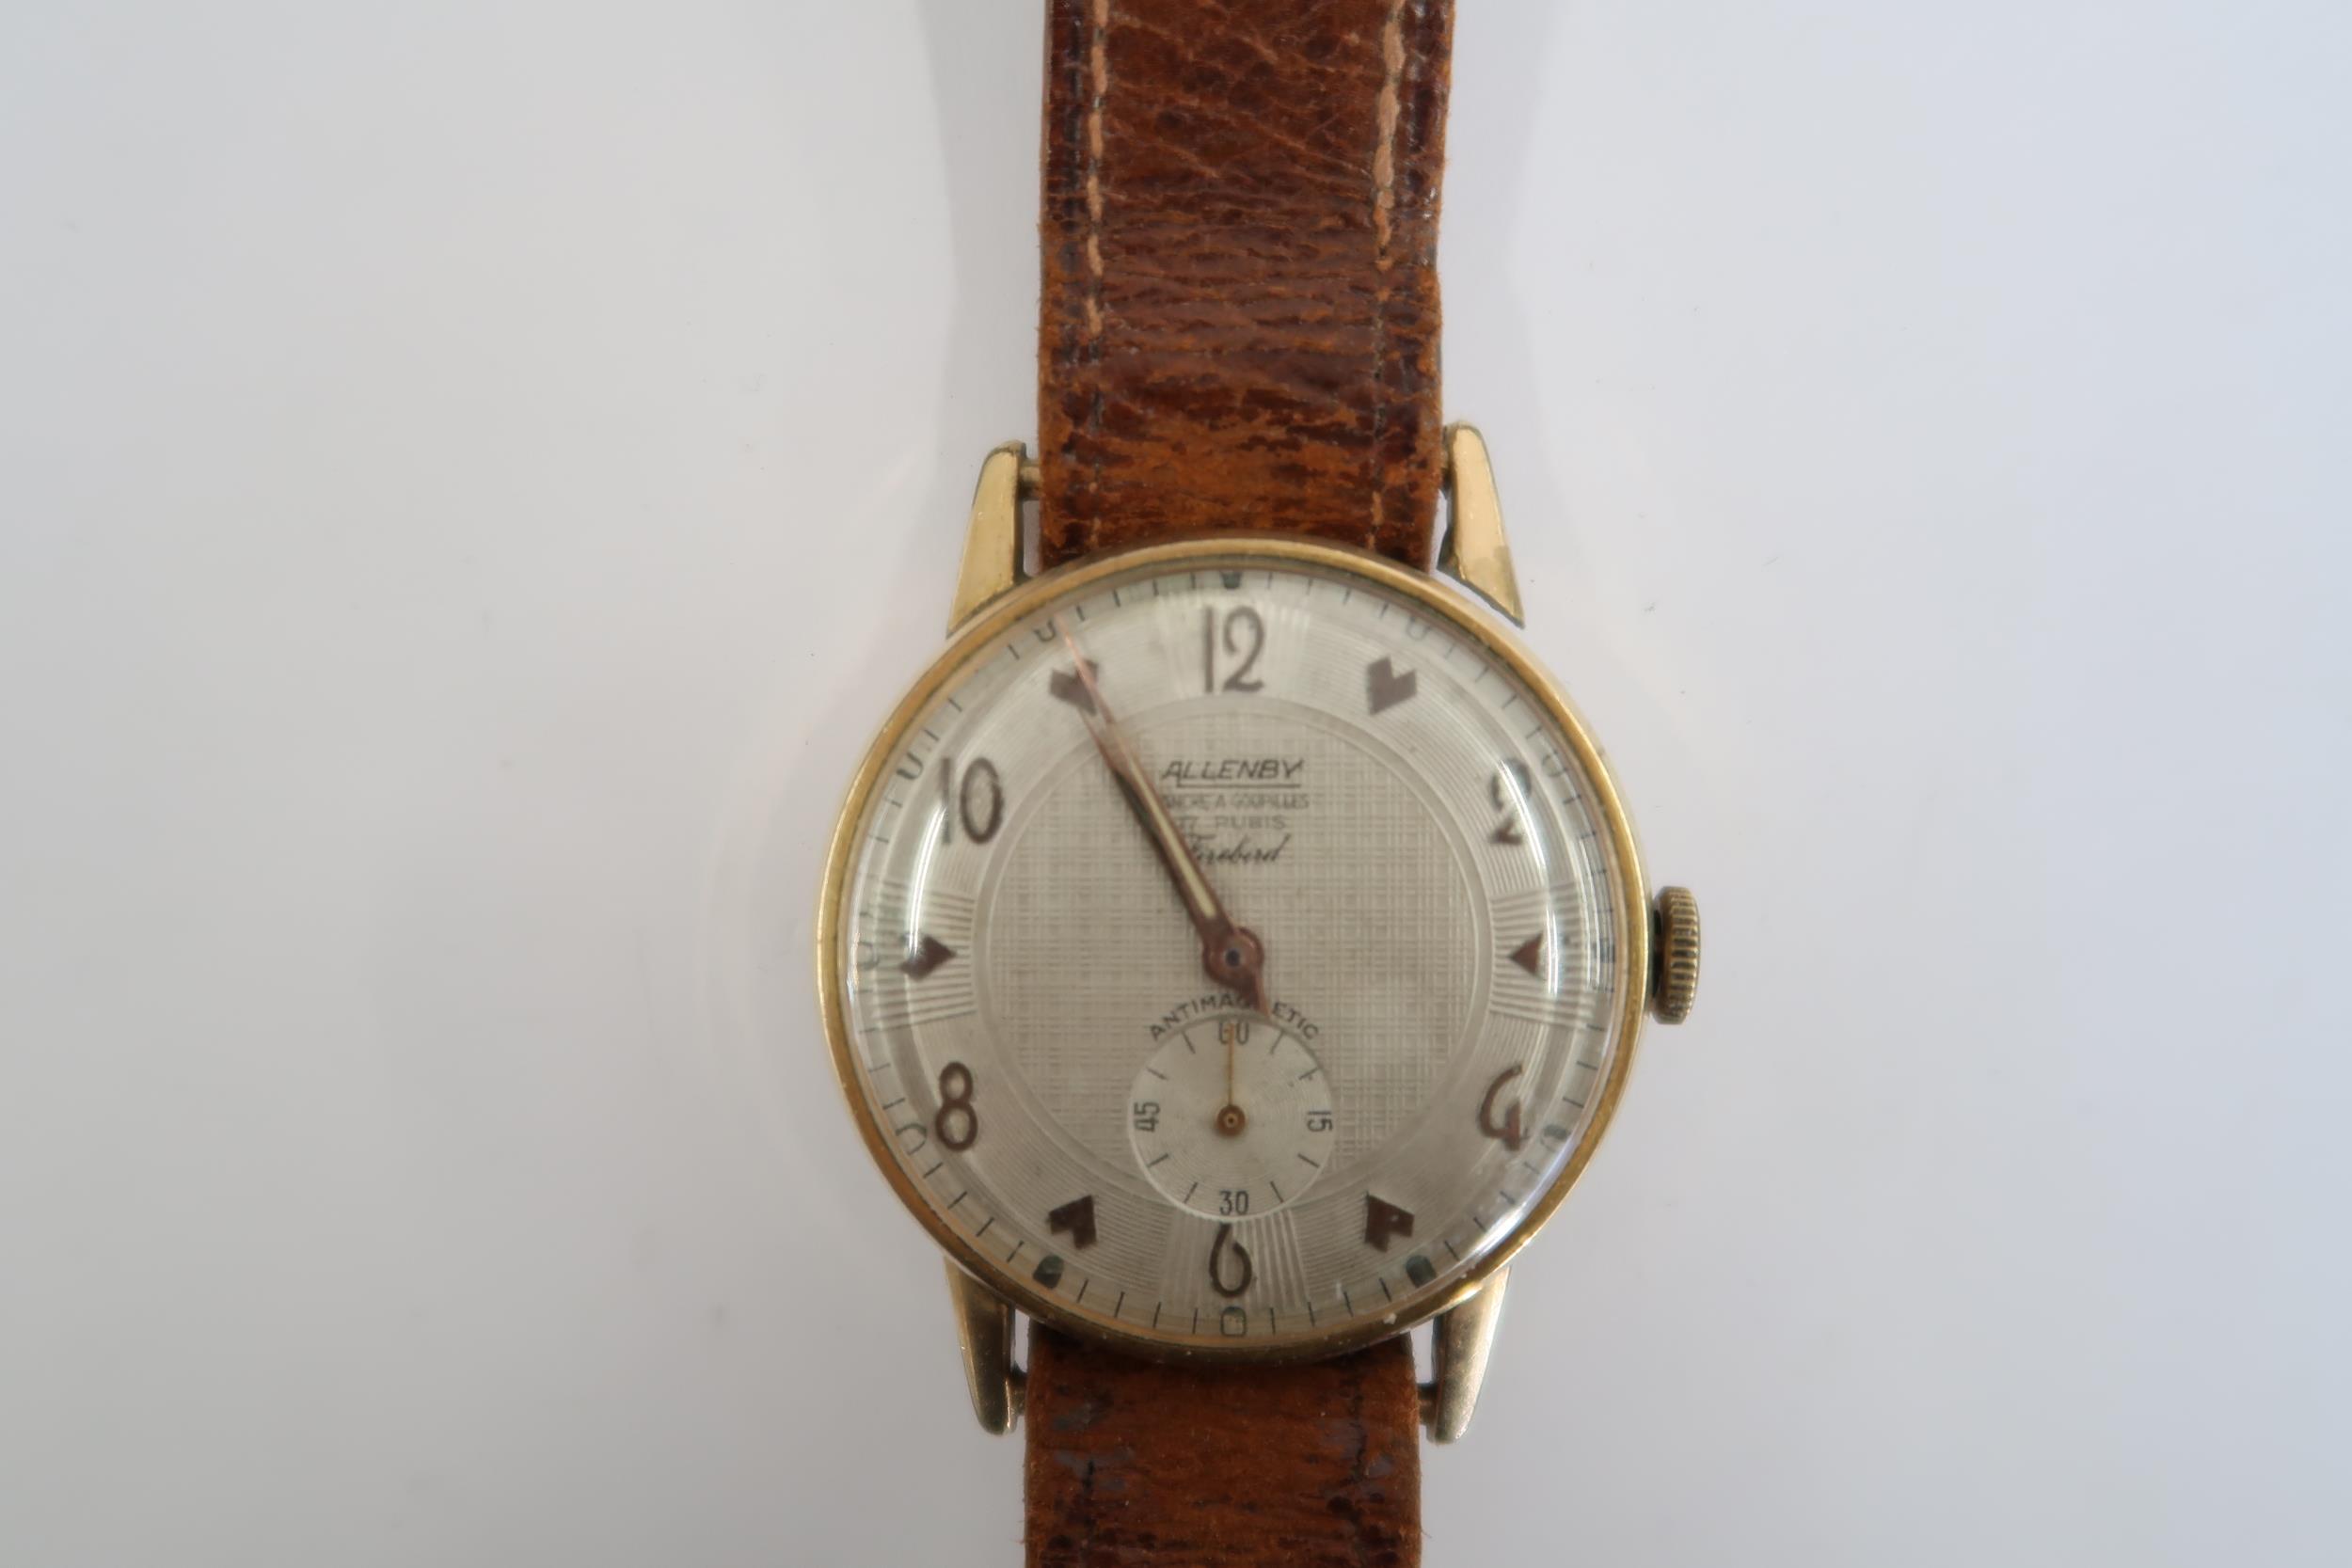 A Gents Allenby automatic watch on a brown leather strap, running in saleroom